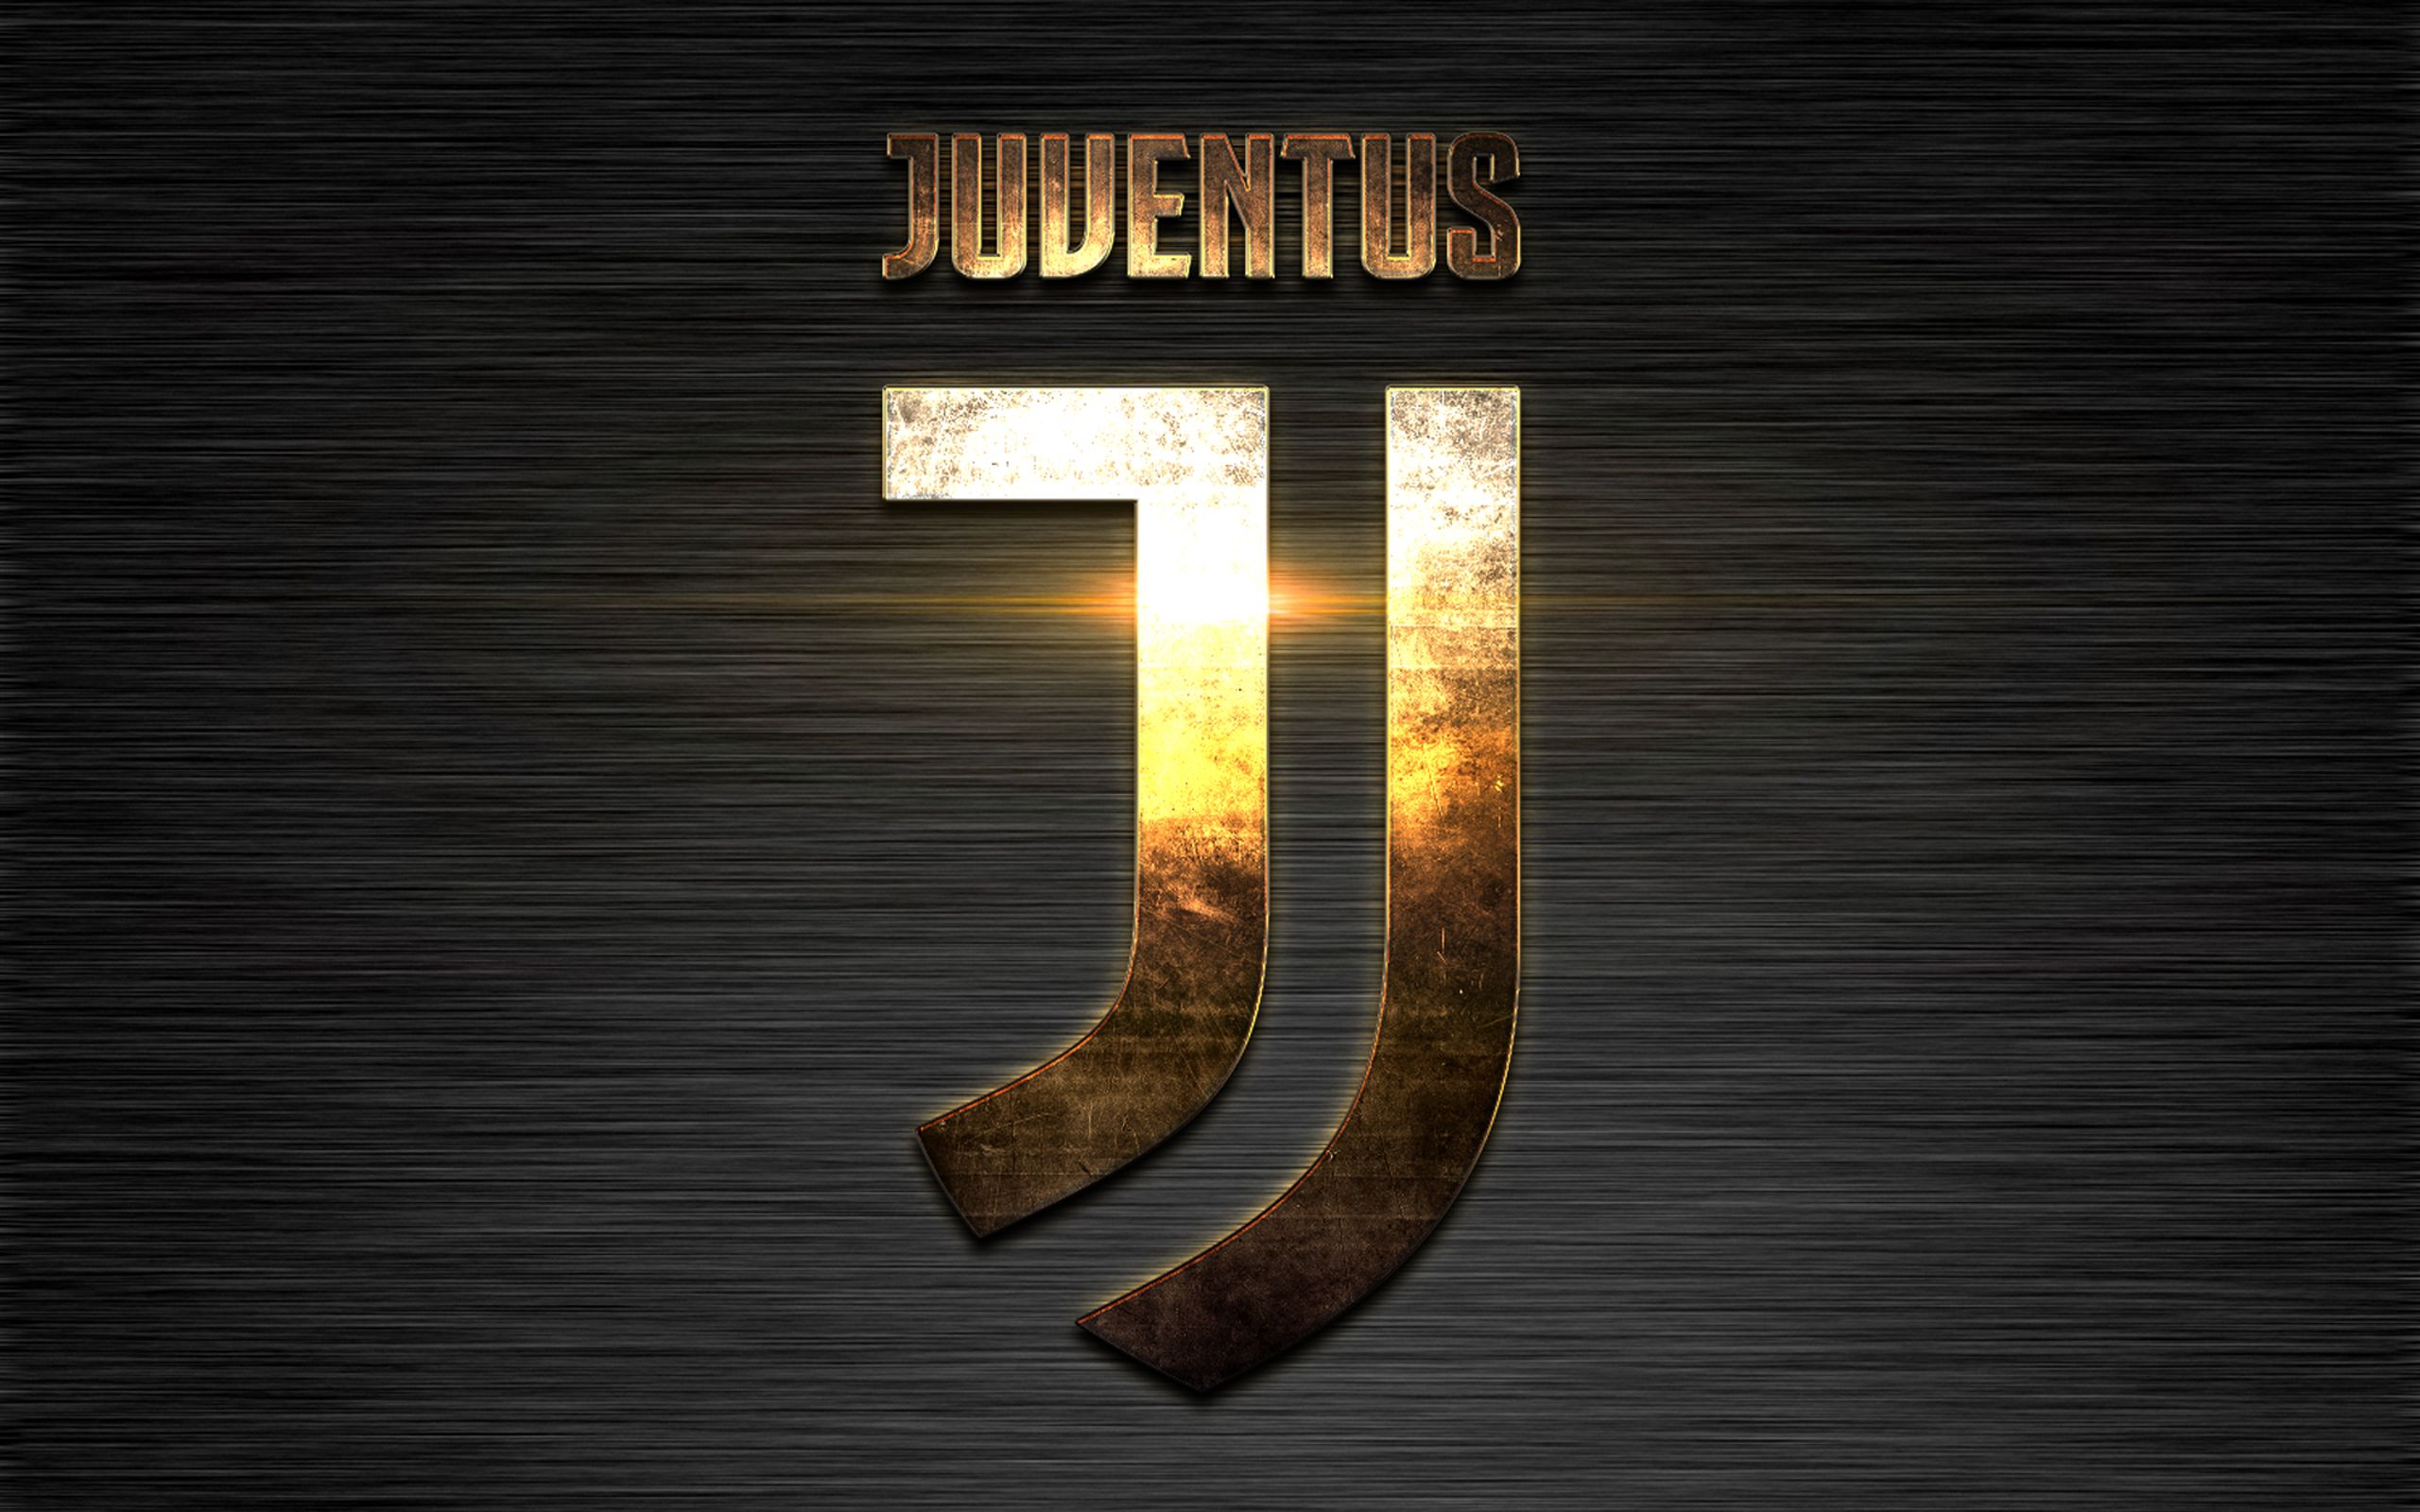 Download wallpaper Juventus FC, gold metal logo, new emblem, Juventus, Italian football club, Turin, Italy, Serie A, football, black metal texture for desktop with resolution 2560x1600. High Quality HD picture wallpaper